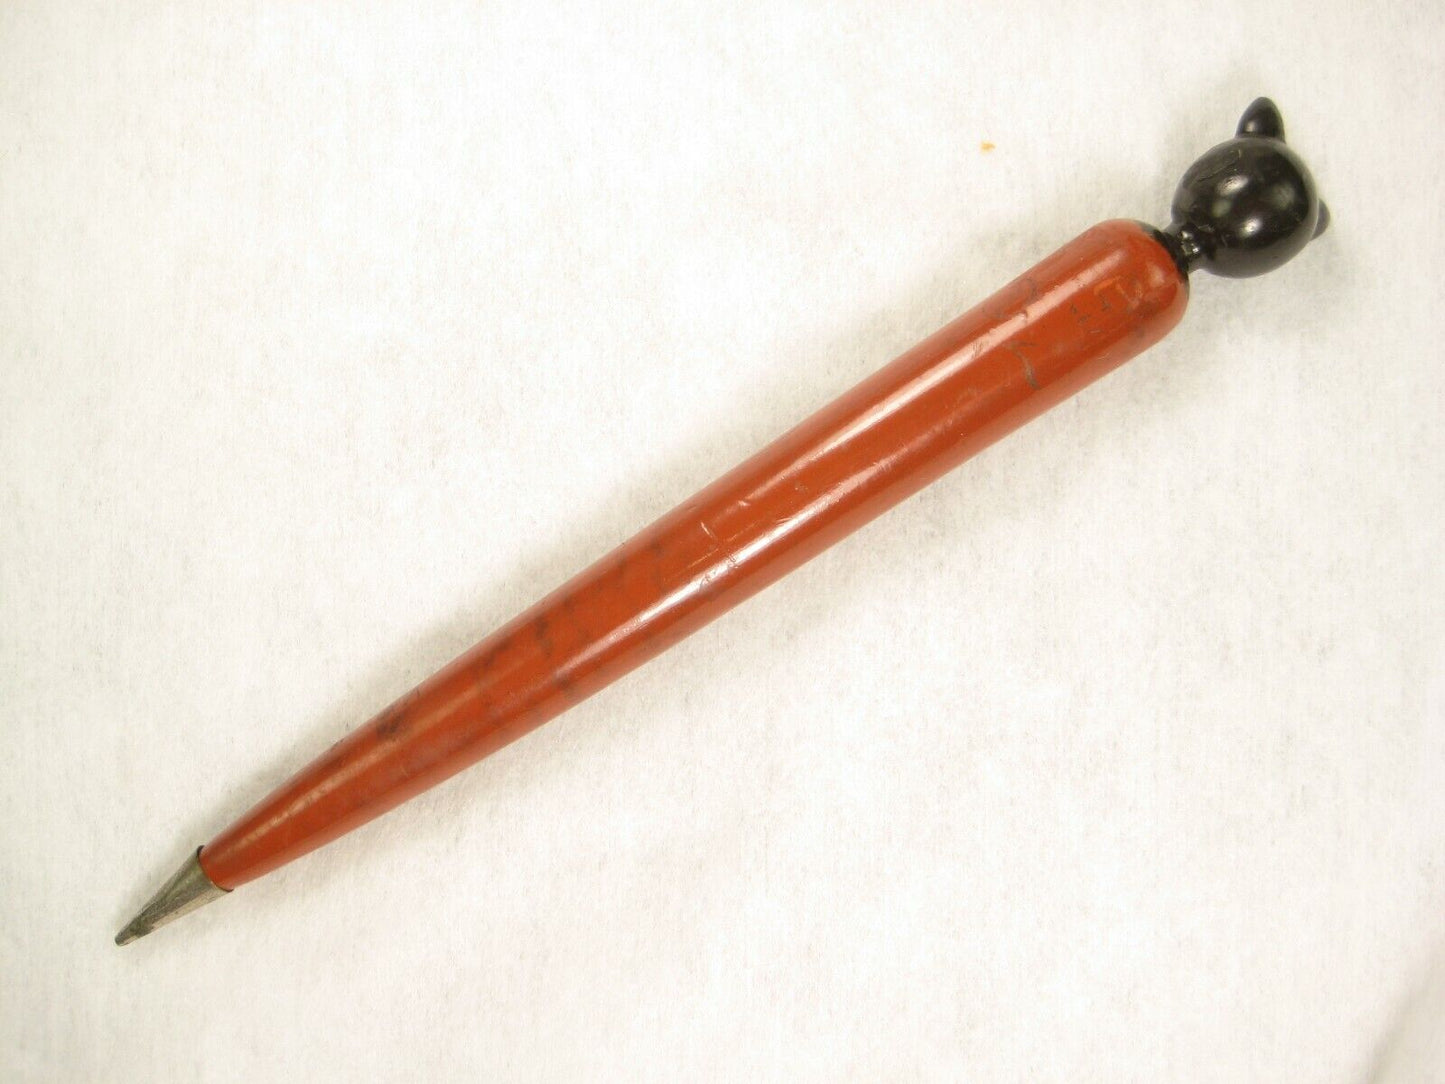 Vintage Japanese Signed Wooden Mechanical Pencil Carved Wooden Kitten Cat Head